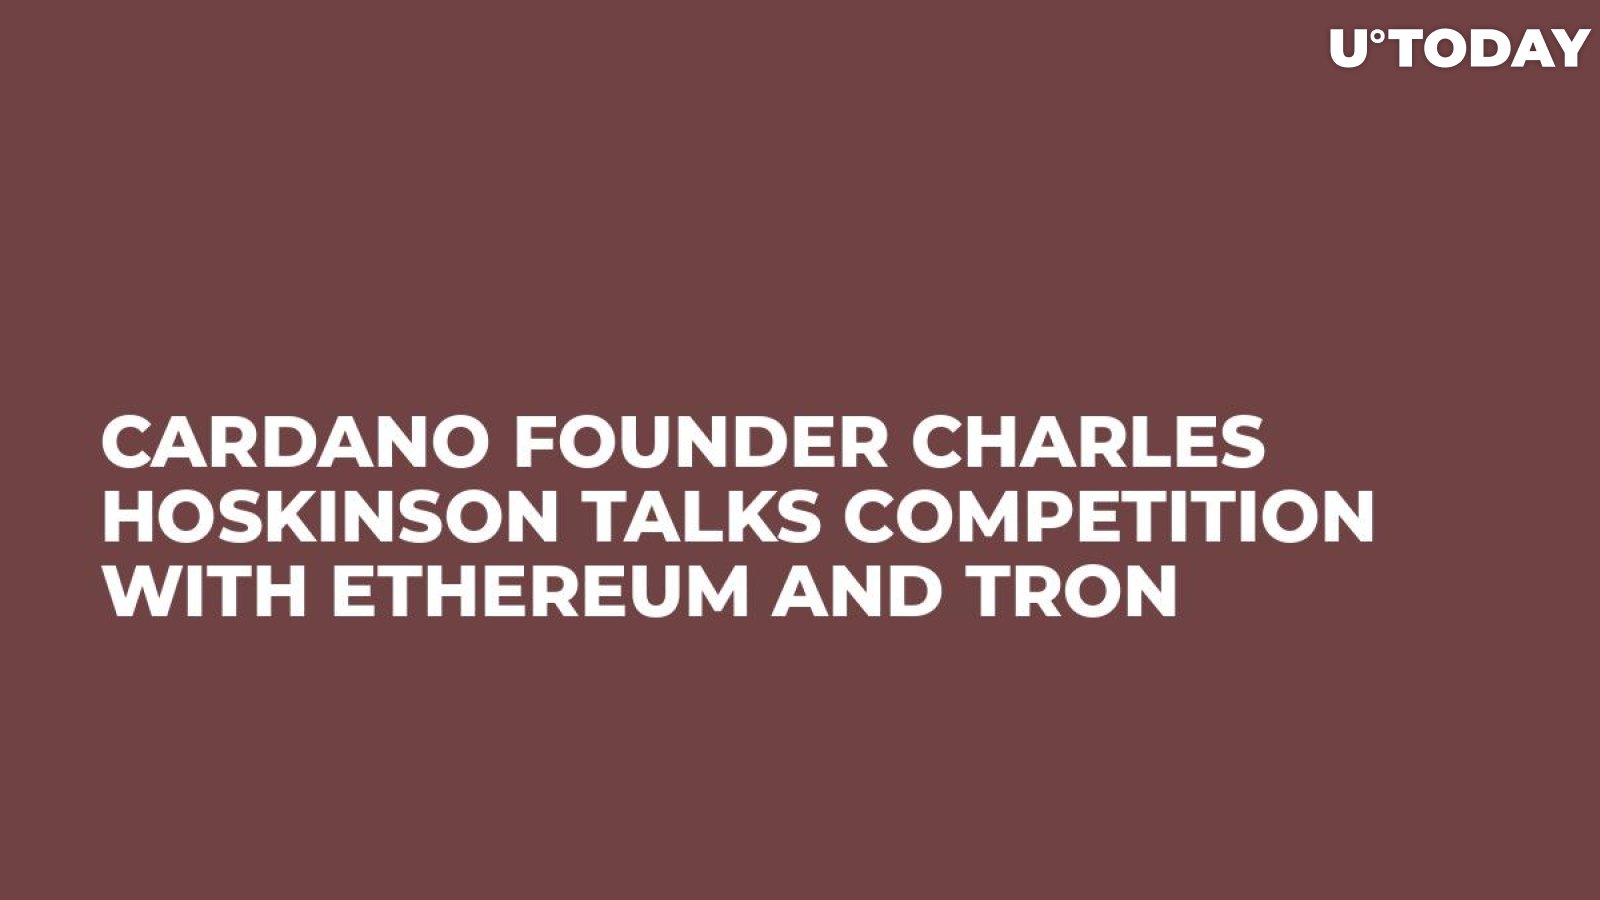 Cardano Founder Charles Hoskinson Talks Competition with Ethereum and Tron 